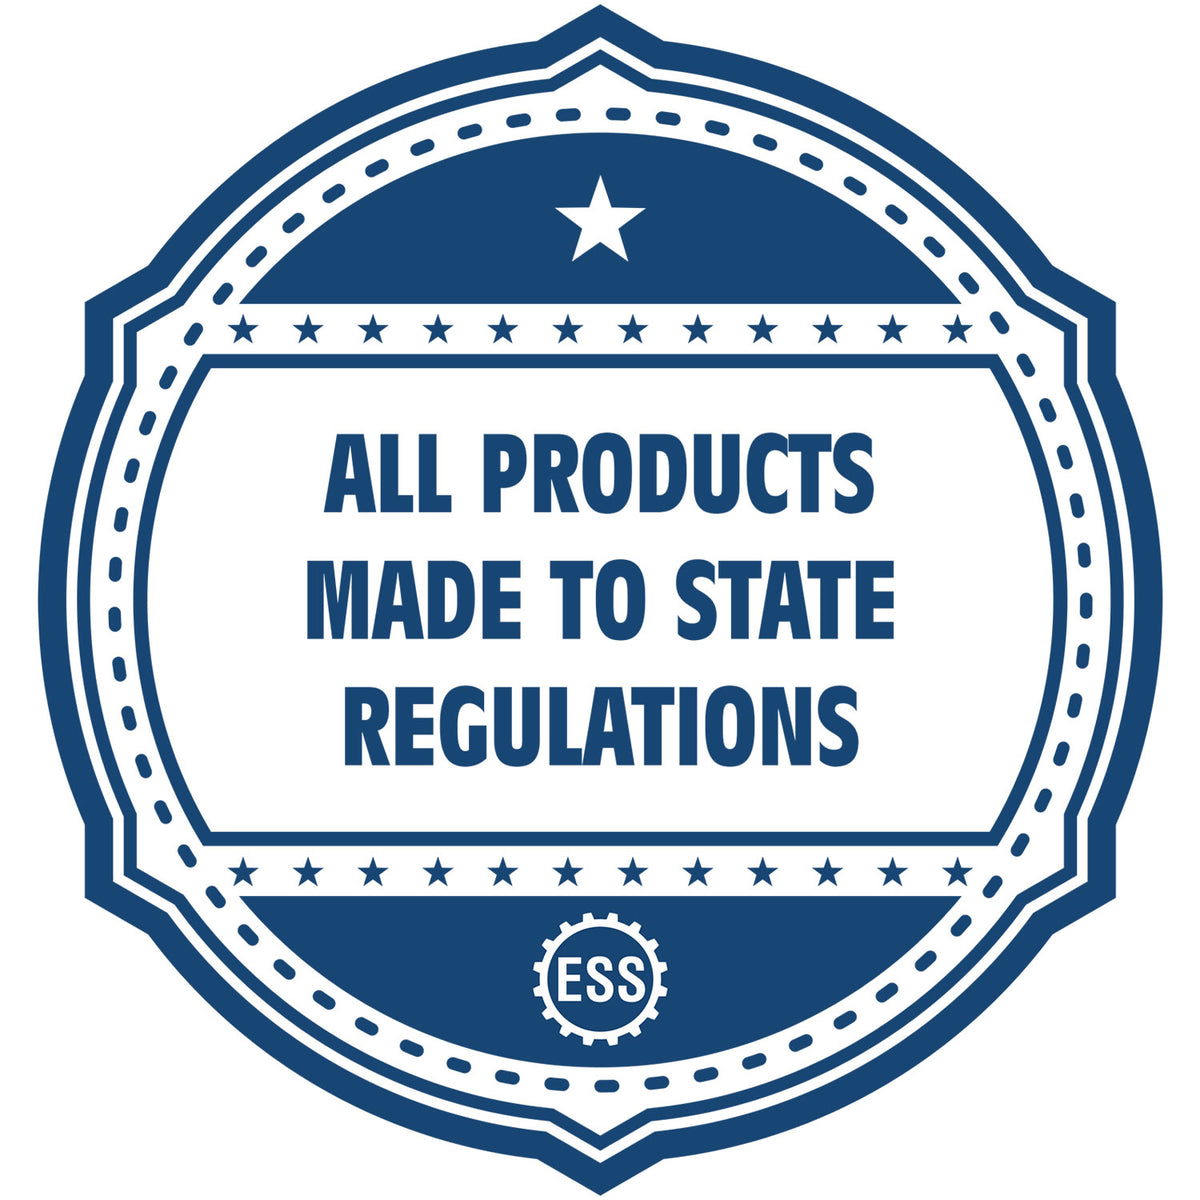 An icon or badge element for the Slim Pre-Inked Missouri Landscape Architect Seal Stamp showing that this product is made in compliance with state regulations.